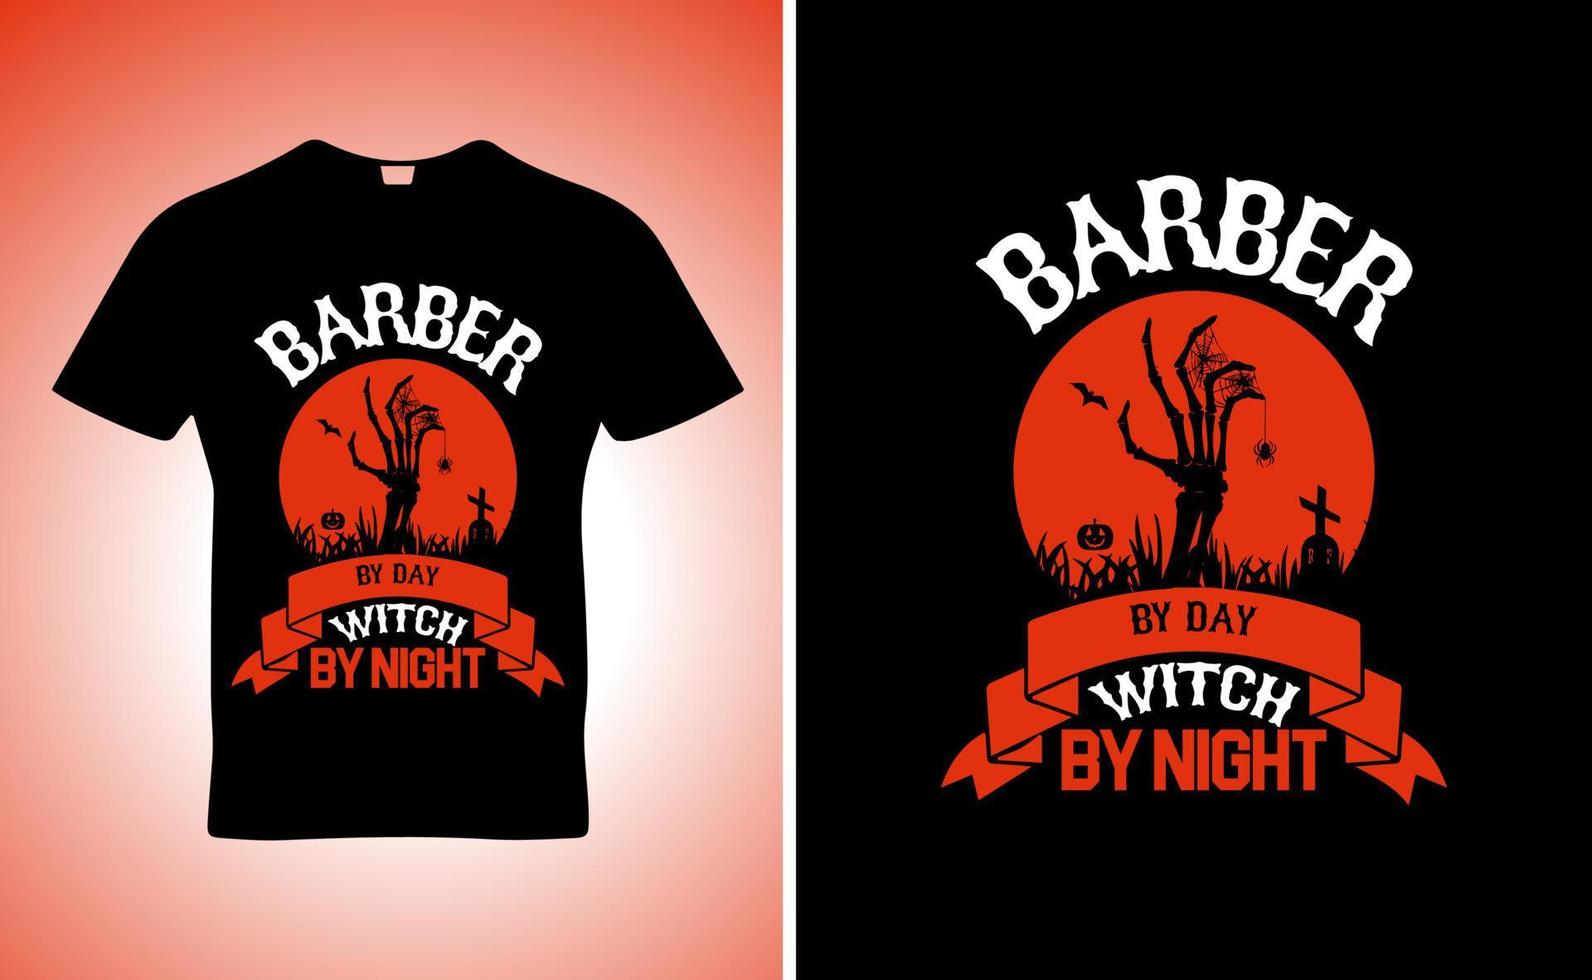 Barber By day  witch by night quote t-shirt template design vector